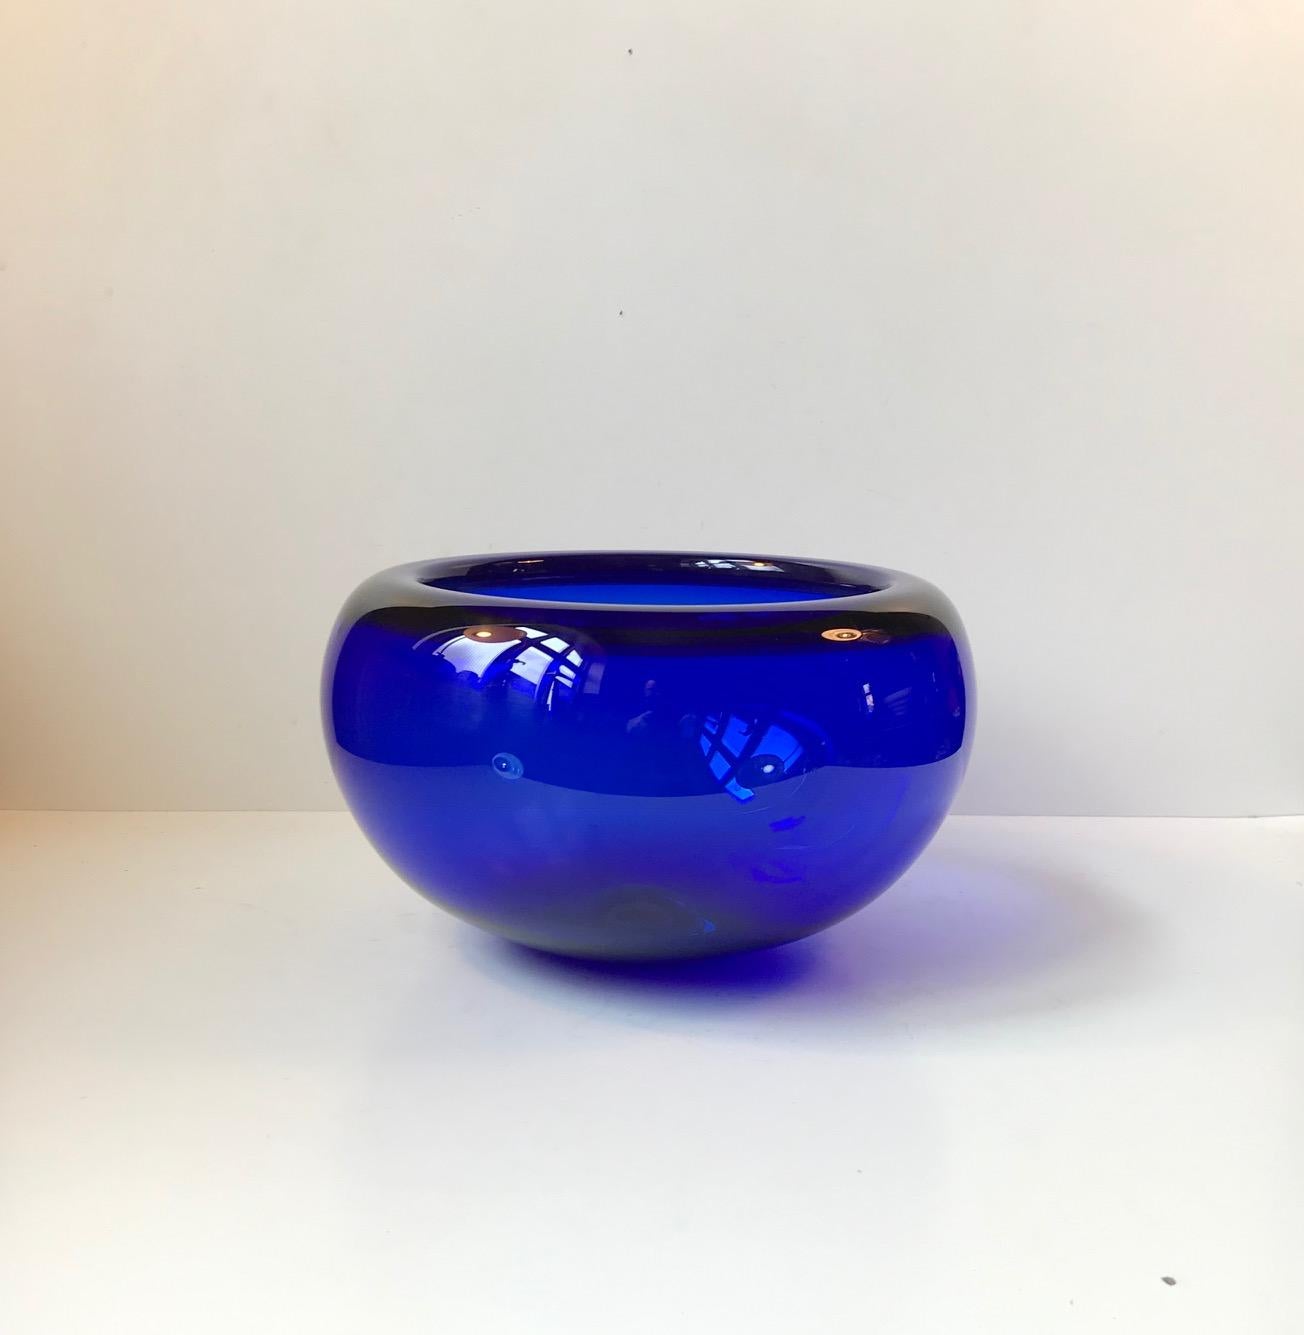 Organically shaped hand blown centerpiece bowl designed by Per Lütken in 1955 and manufactured by Holmegaard in Denmark. This is an example from the 1980s.